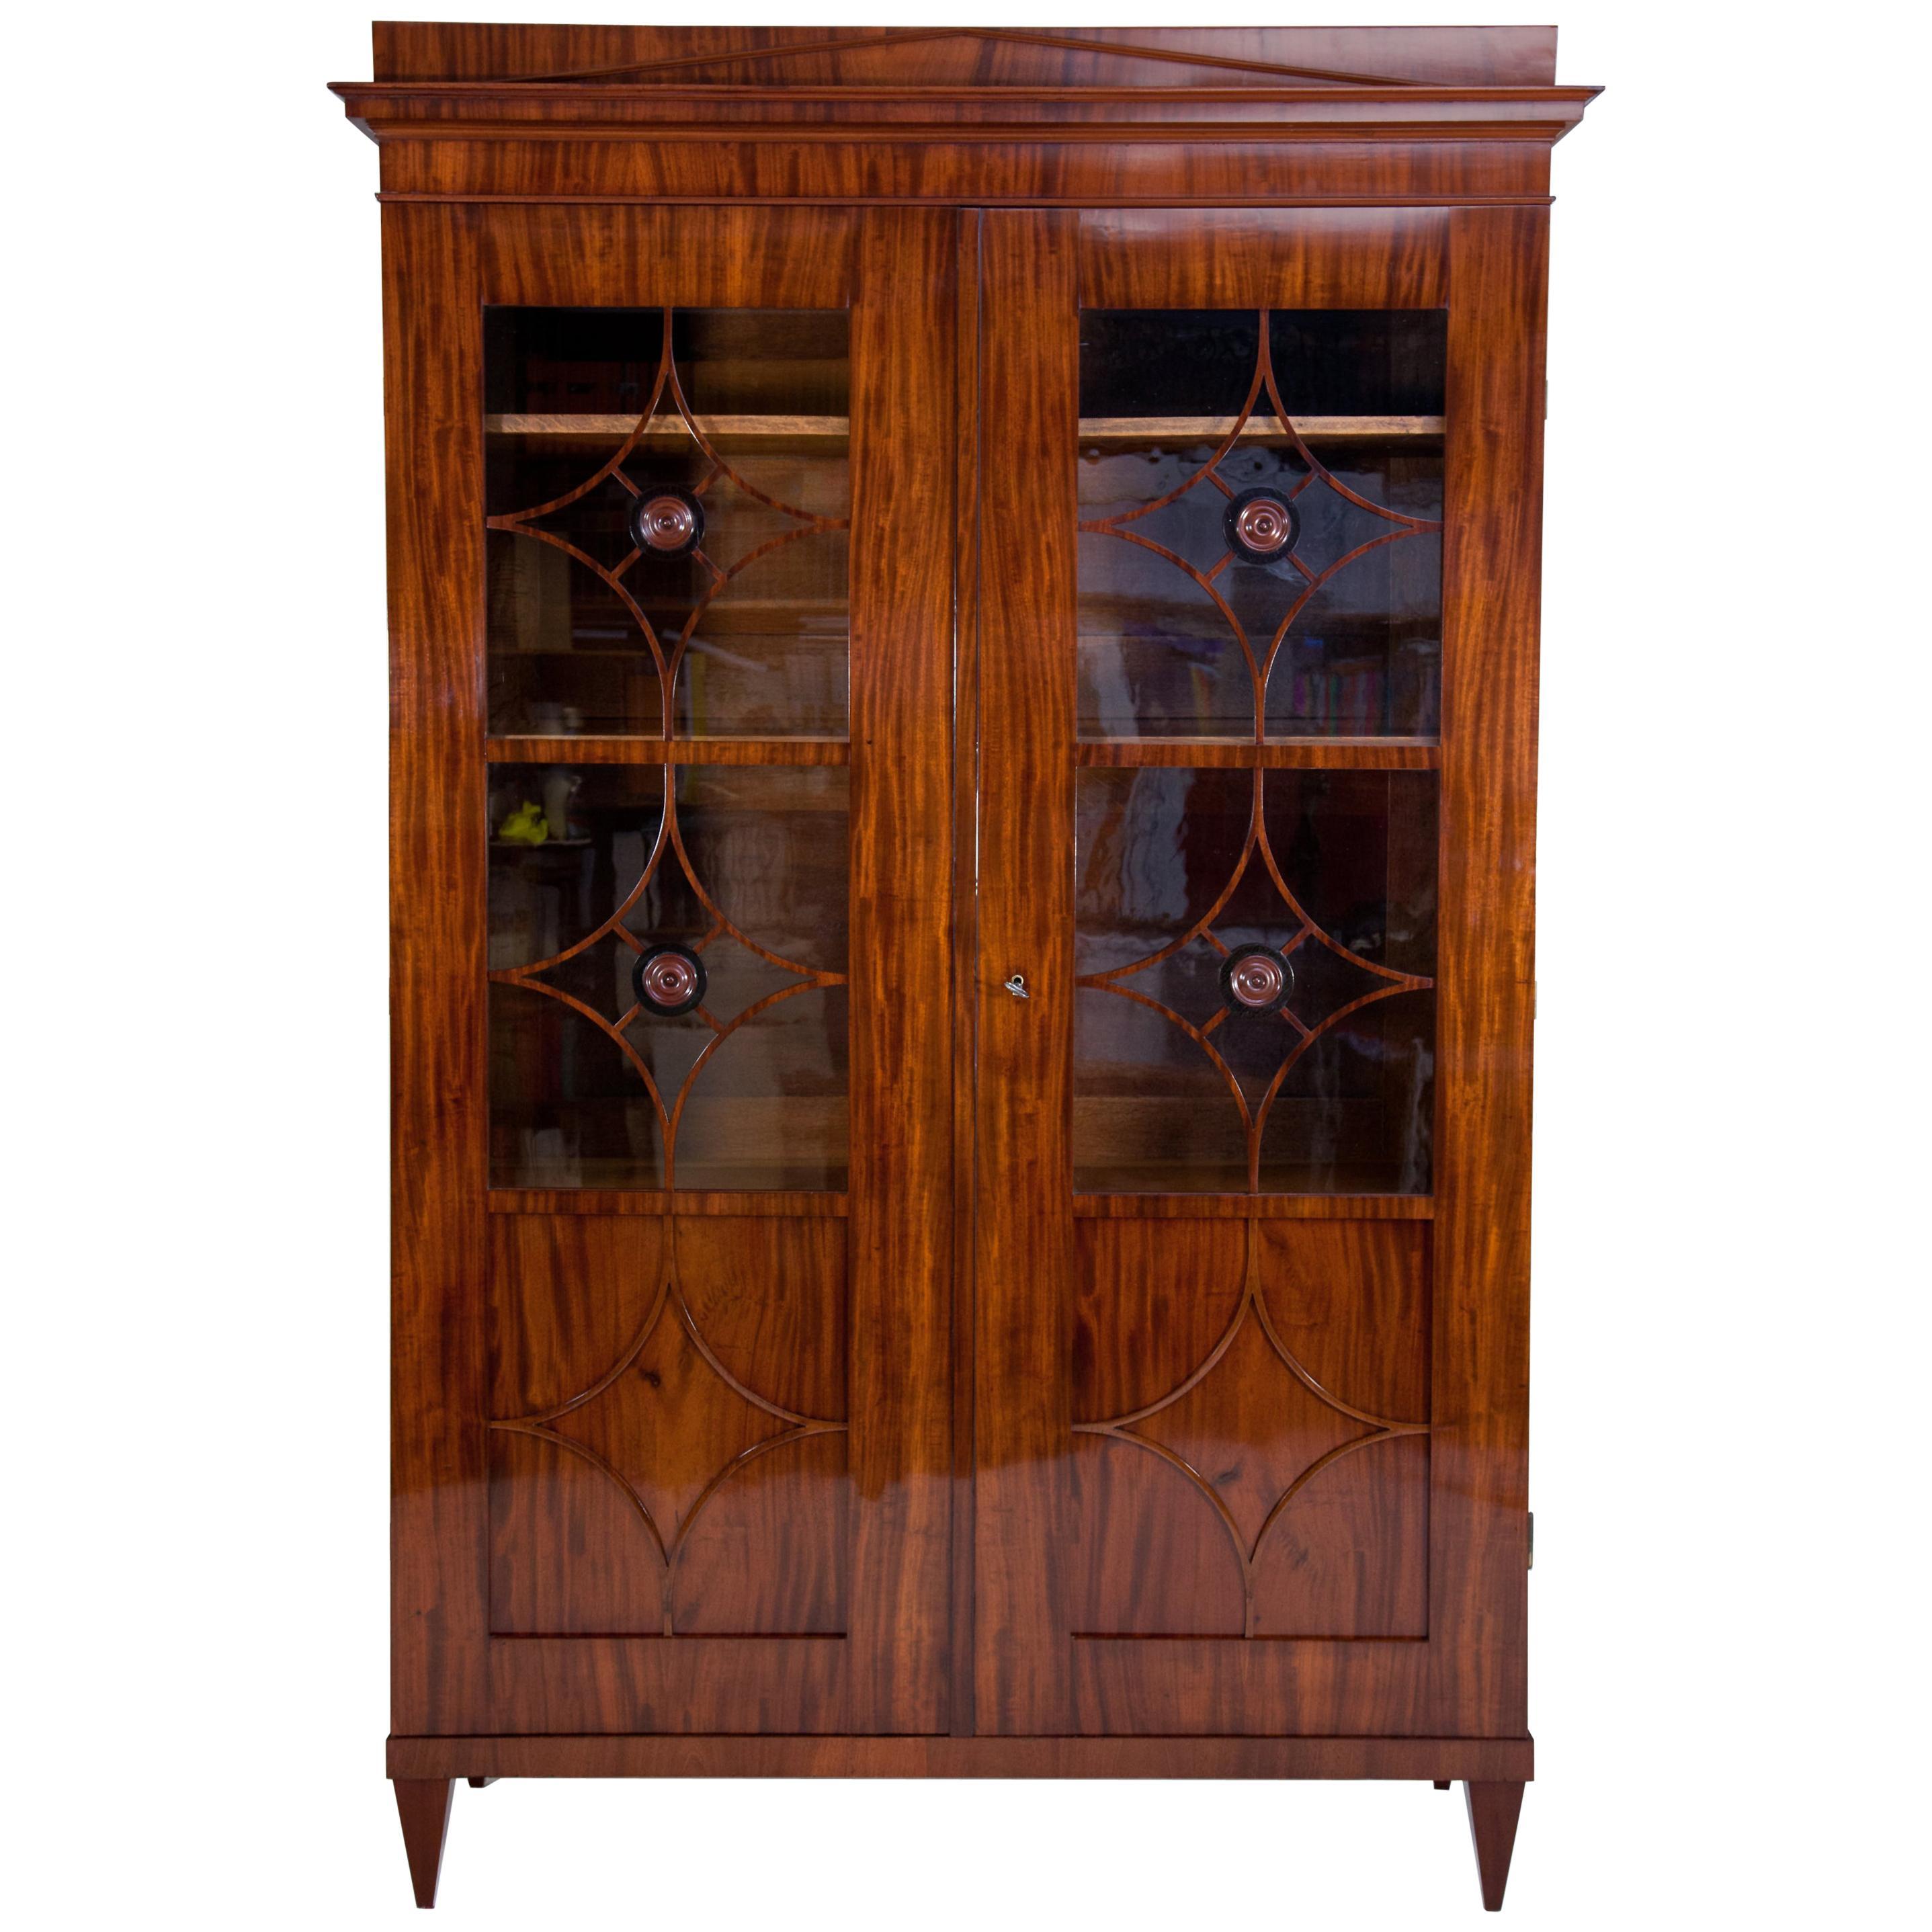 19th Century Austrian Biedermeier Flame Mahogany Neoclassical Style Bookcase For Sale